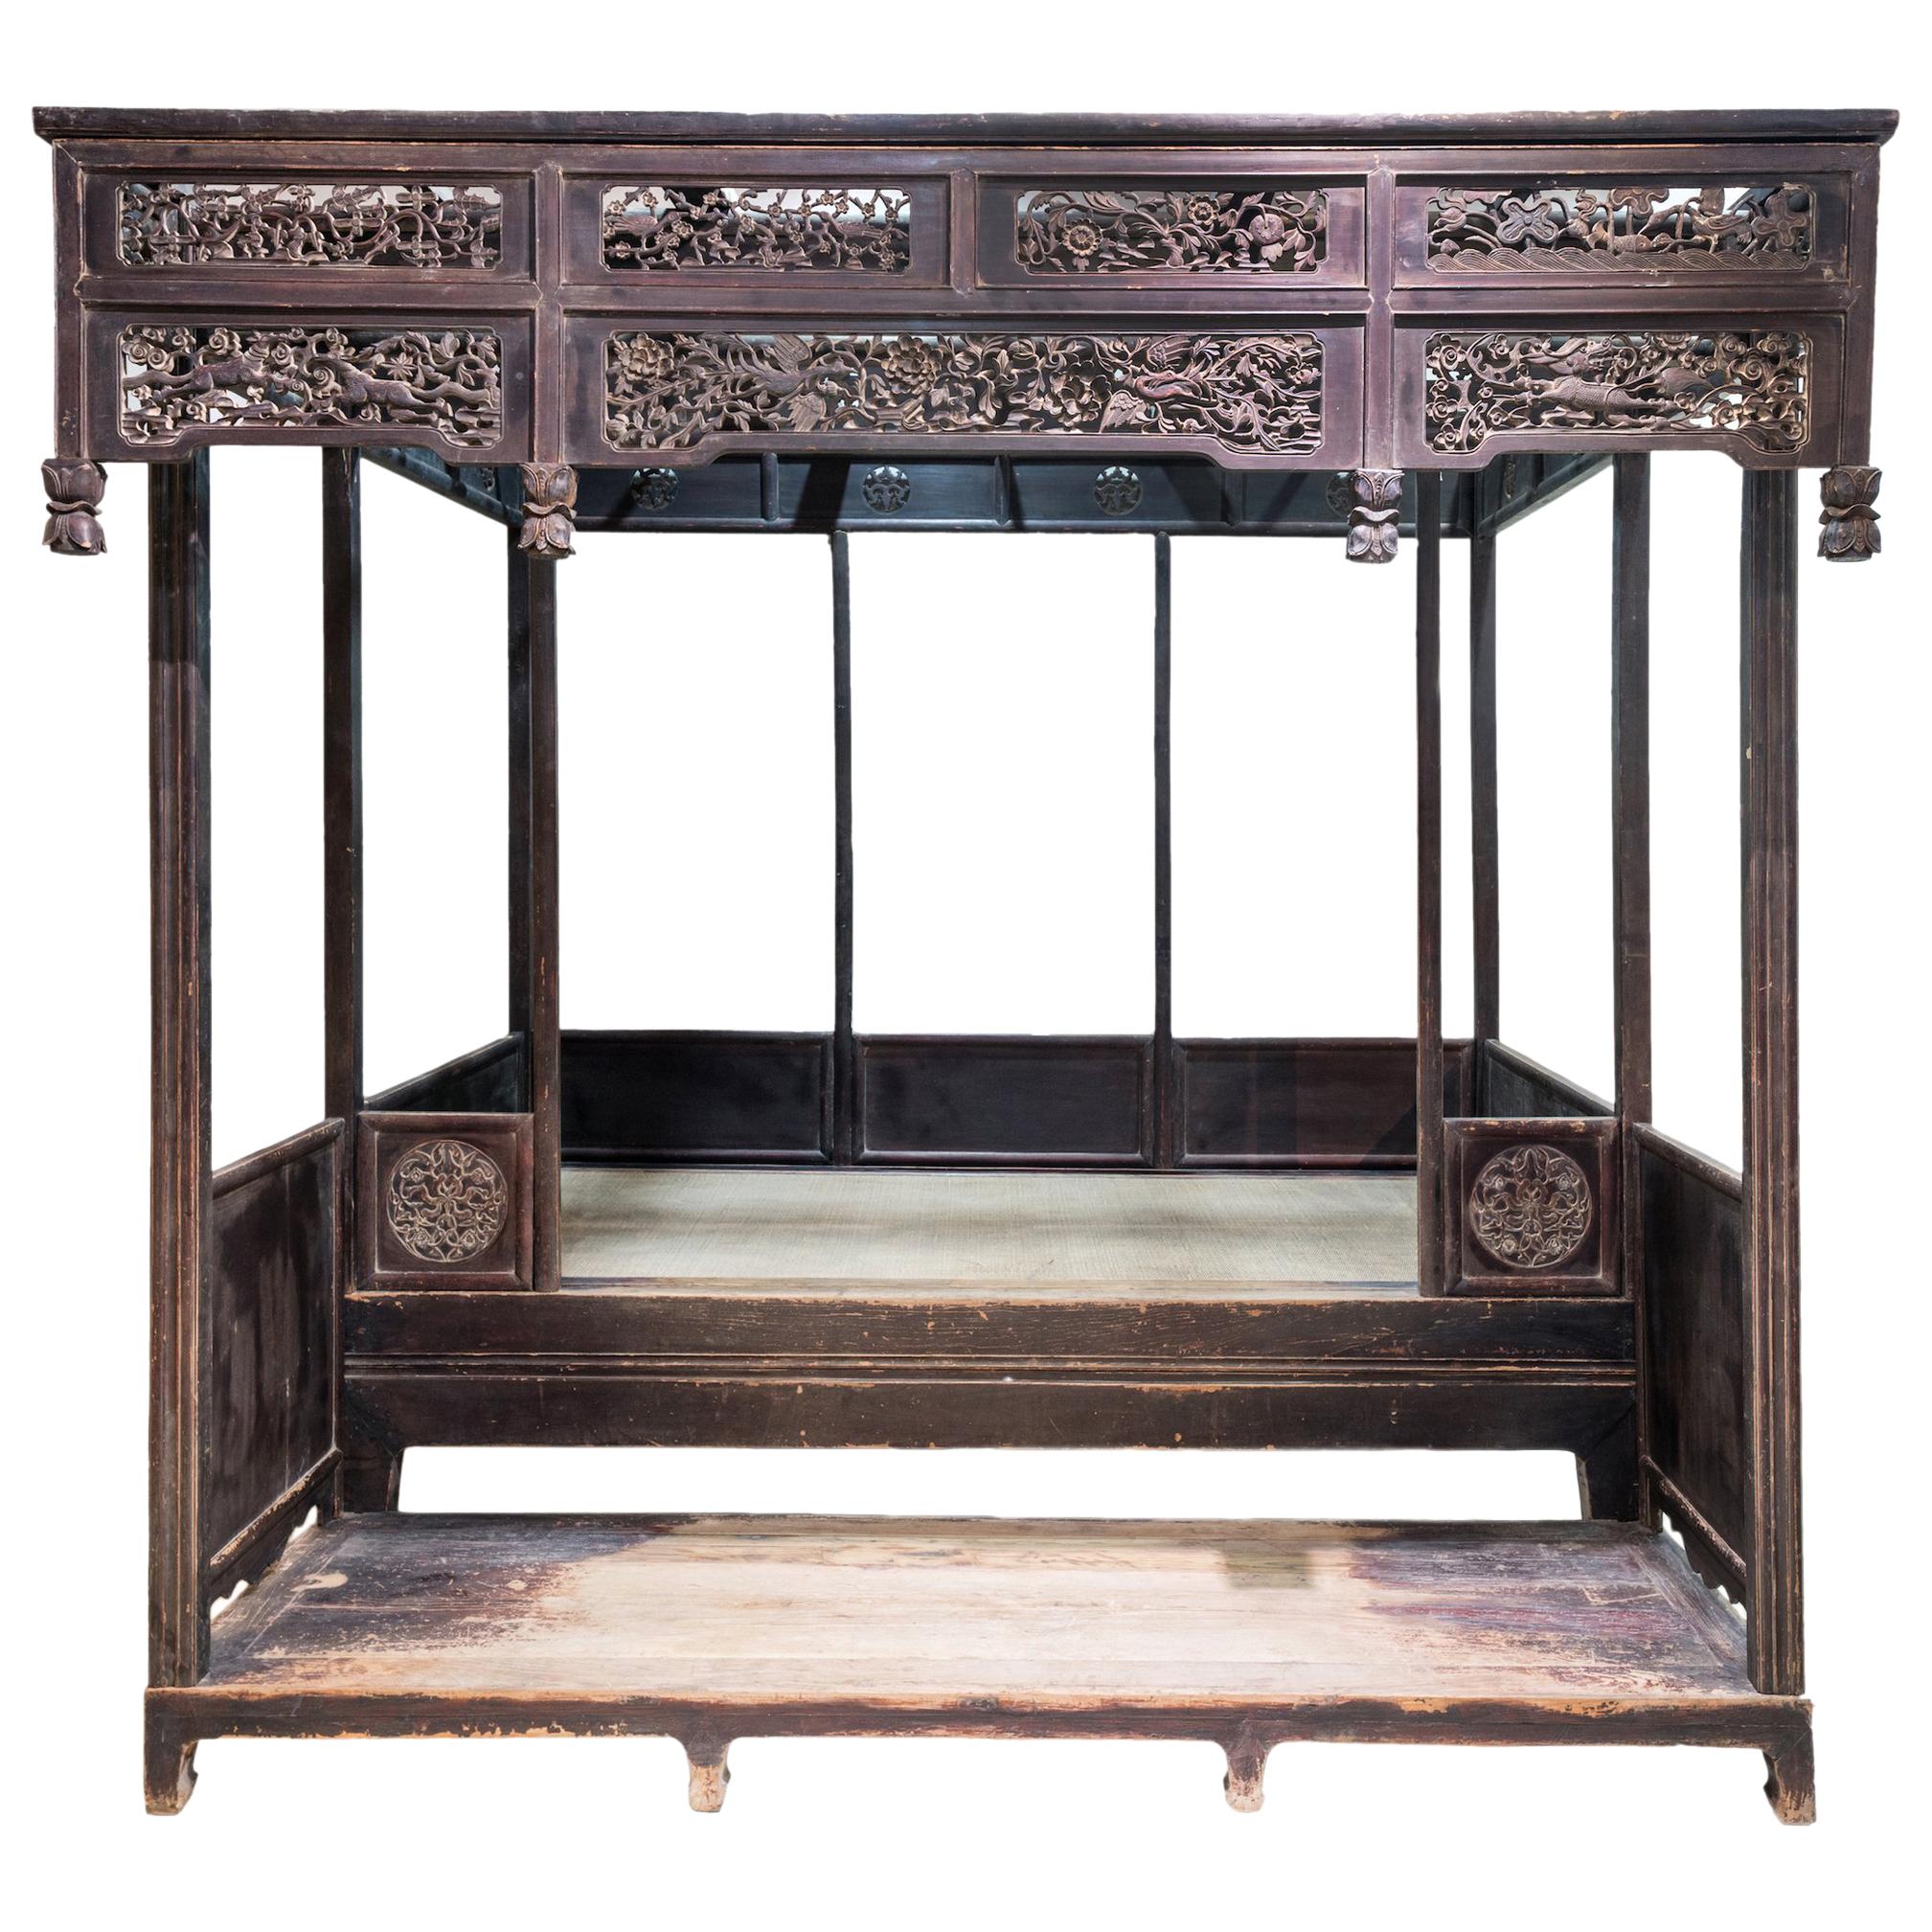 Late 19th Century Canopy Bed from Shanxi, China